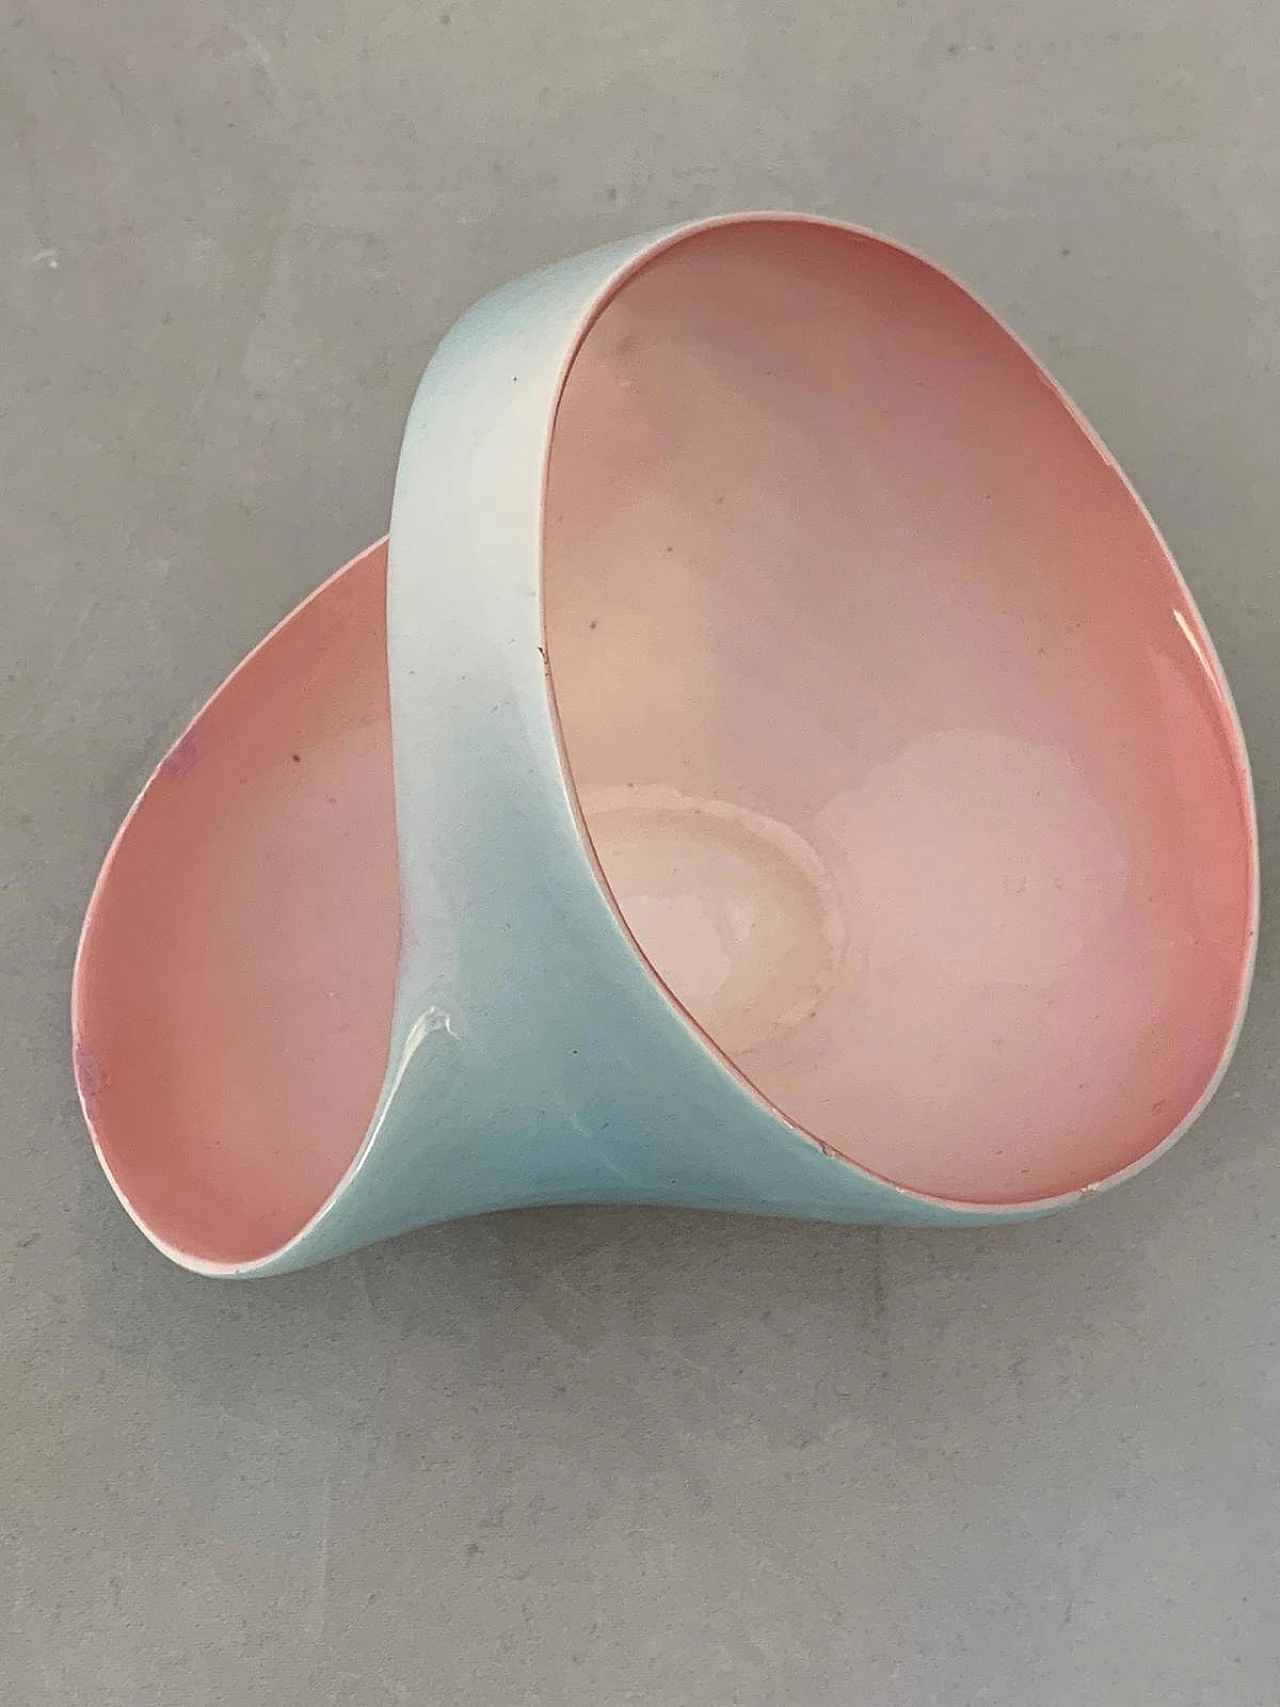 Rose and sky-blue vase with handle by Ariello, Turin, 1950s 1109013